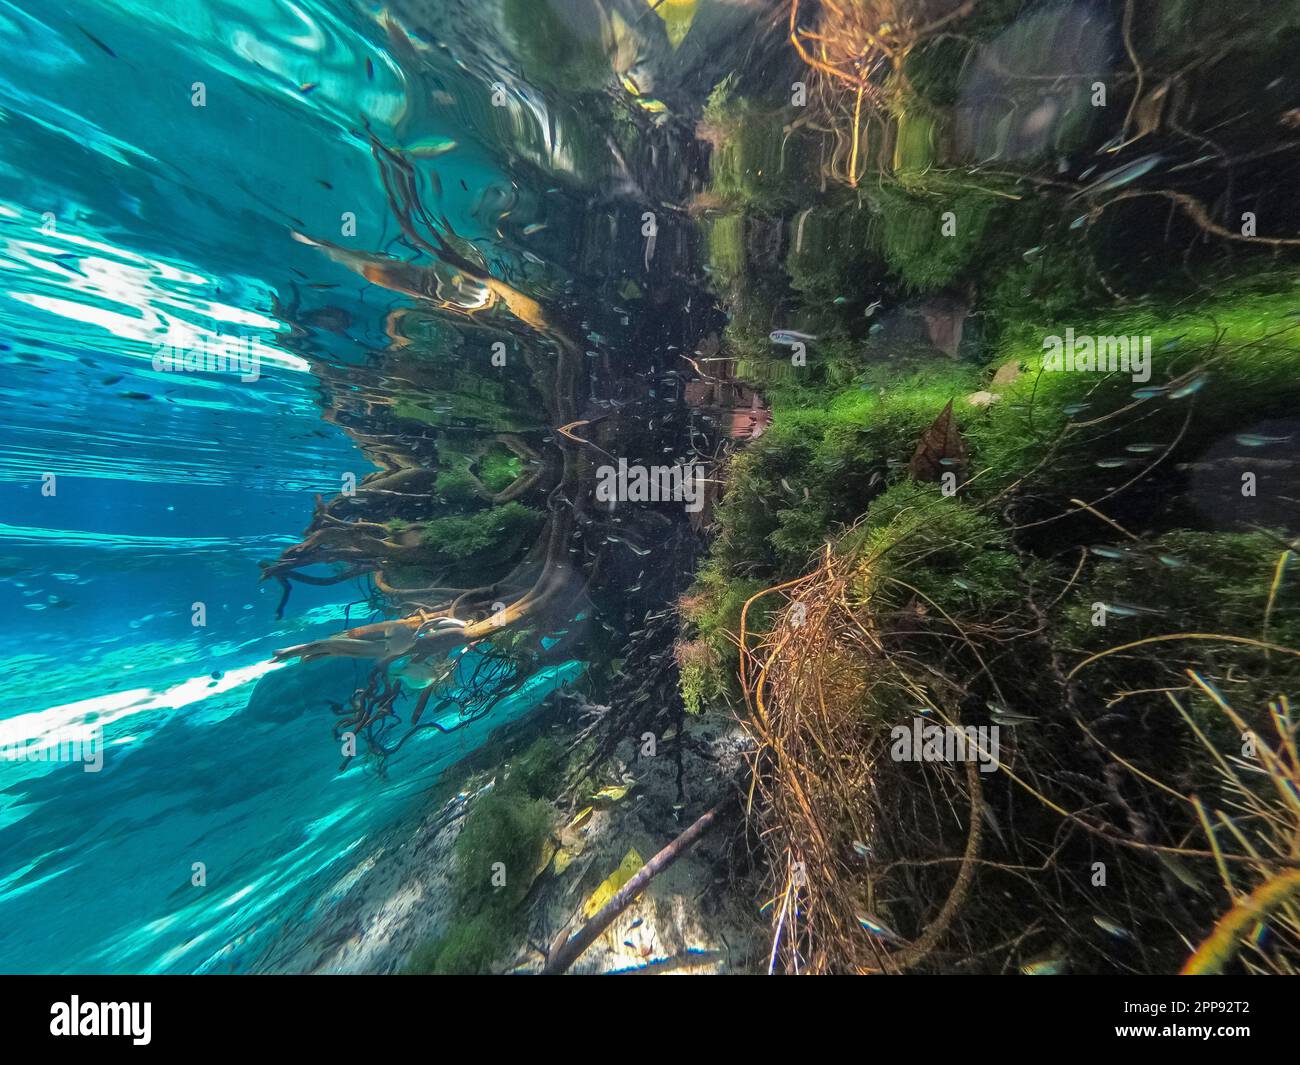 View underwater in a crystal clear rainforest river with tropical fishes, reflections of sunlight and vegetation, Bom Jardim, Mato Grosso, Brazil Stock Photo